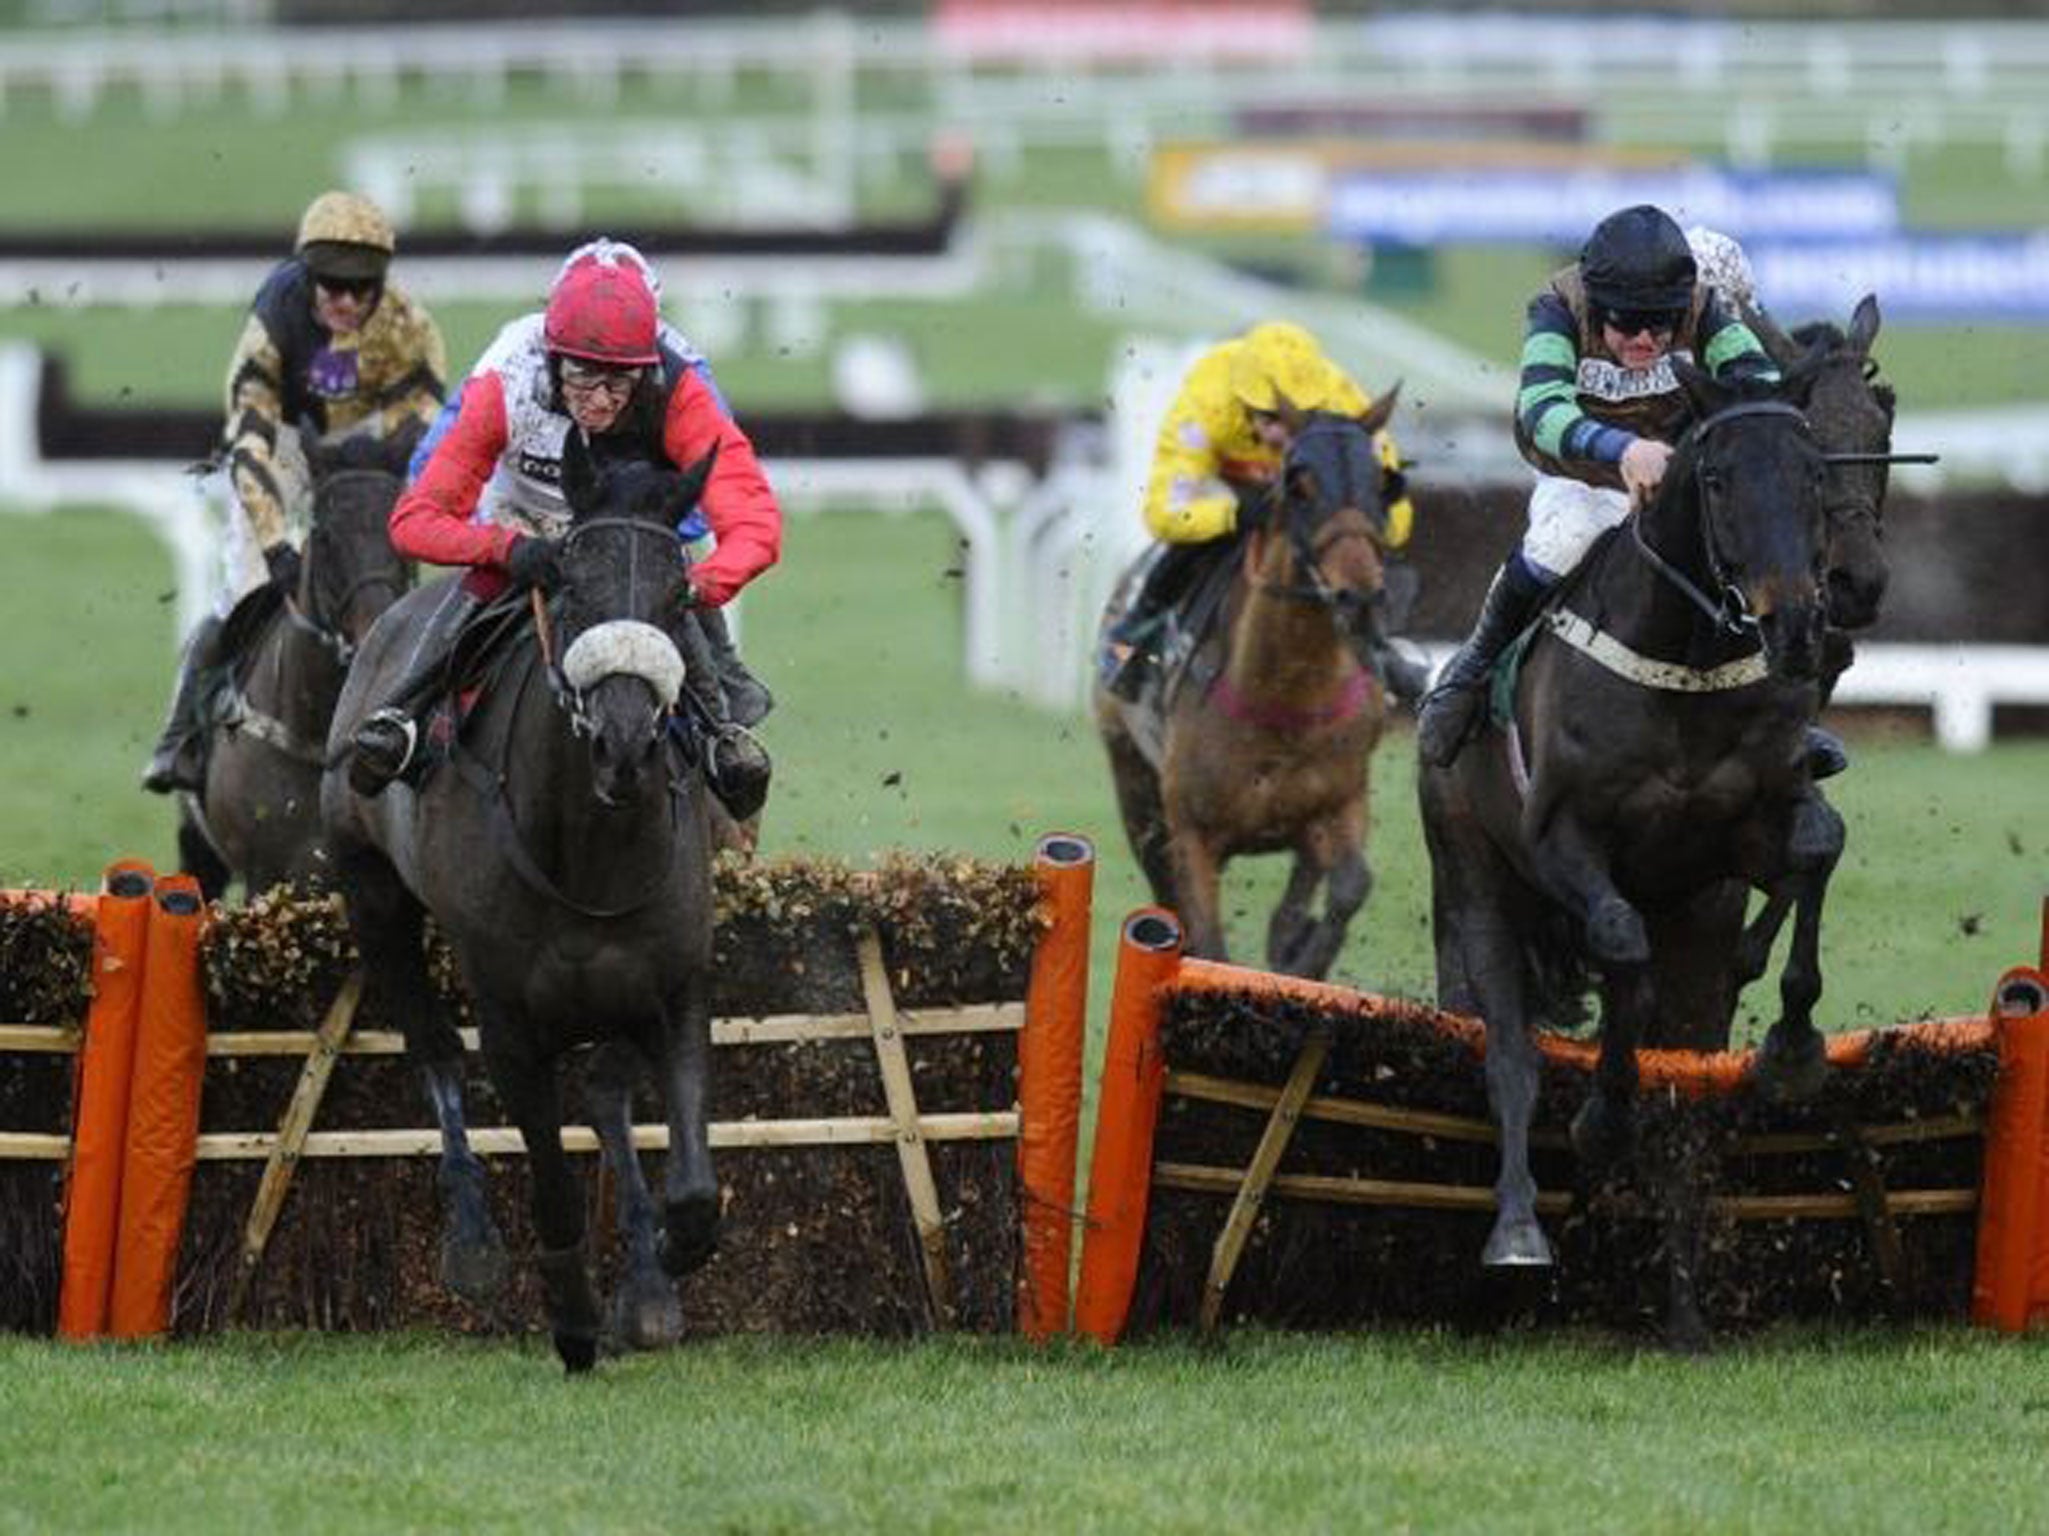 Knock out: Knockara Beau (right) reels in Big Buck’s at the final obstacle of the Cleeve Hurdle to beat the marathon specialist on his return from injury